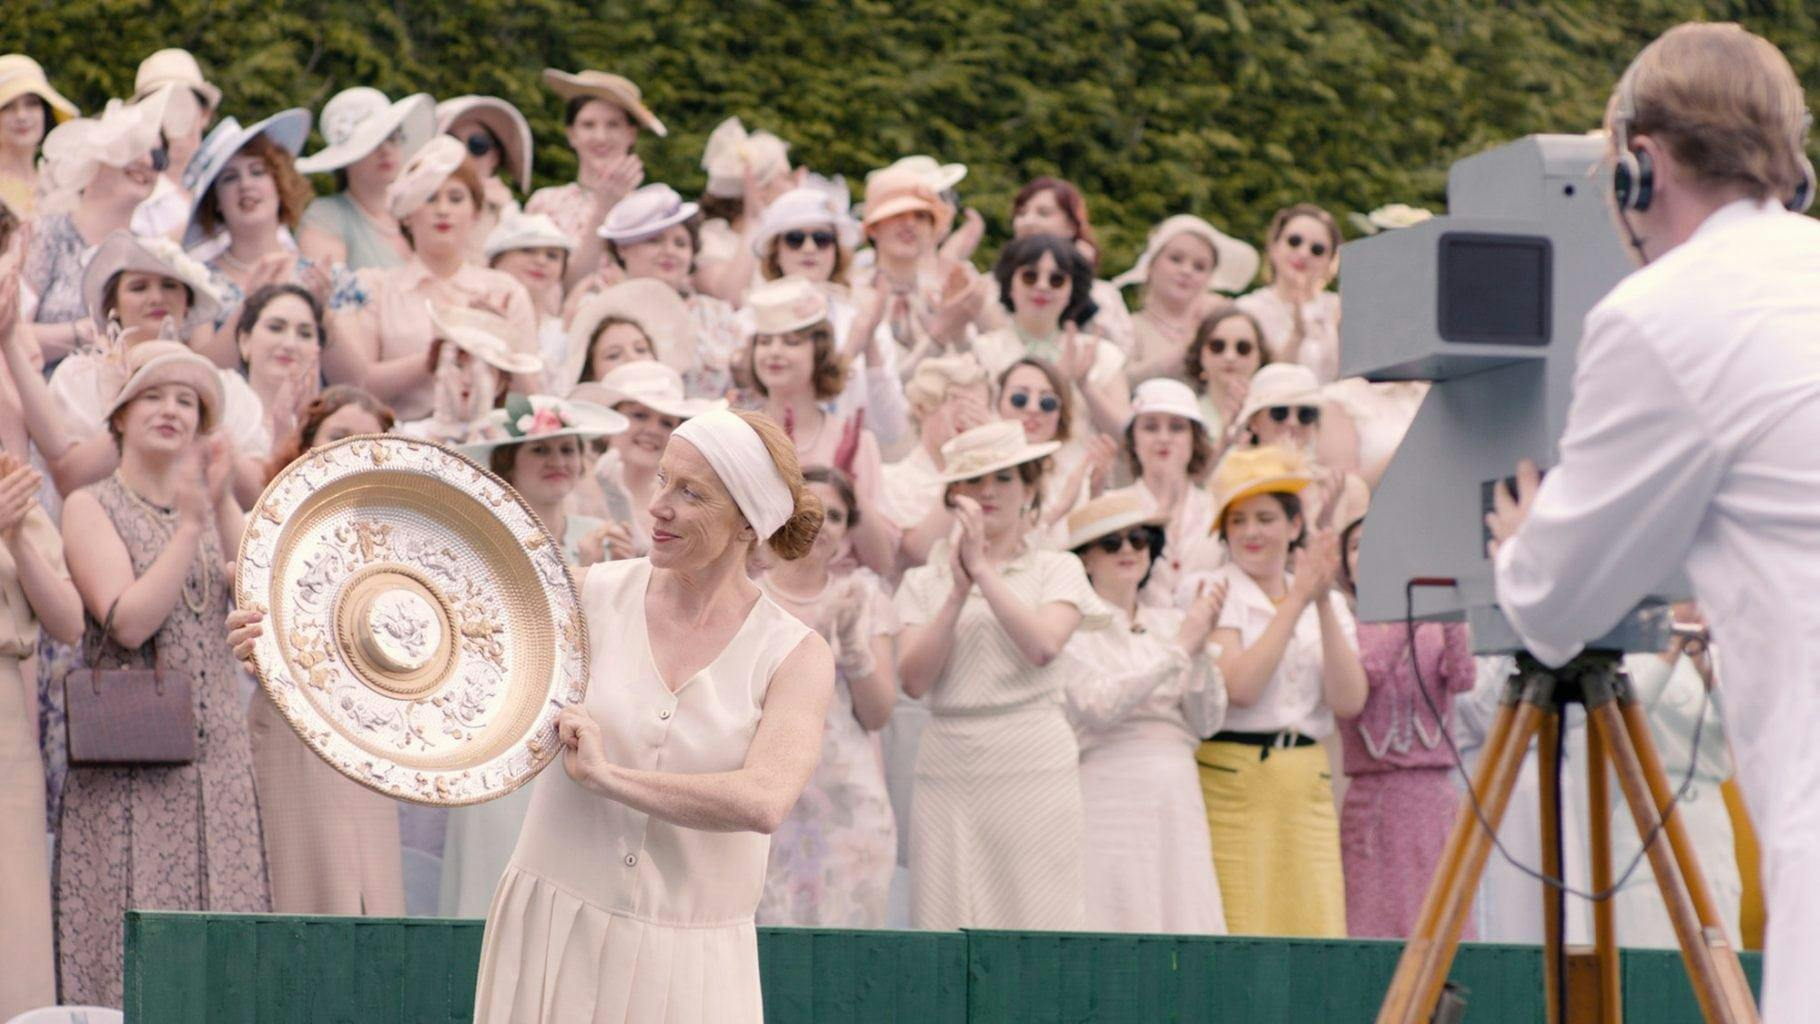 Performers in a period film. An actress in costume as a tennis player holds a gold shield trophy. A crowd of people in period costume are stood behind them, applauding.